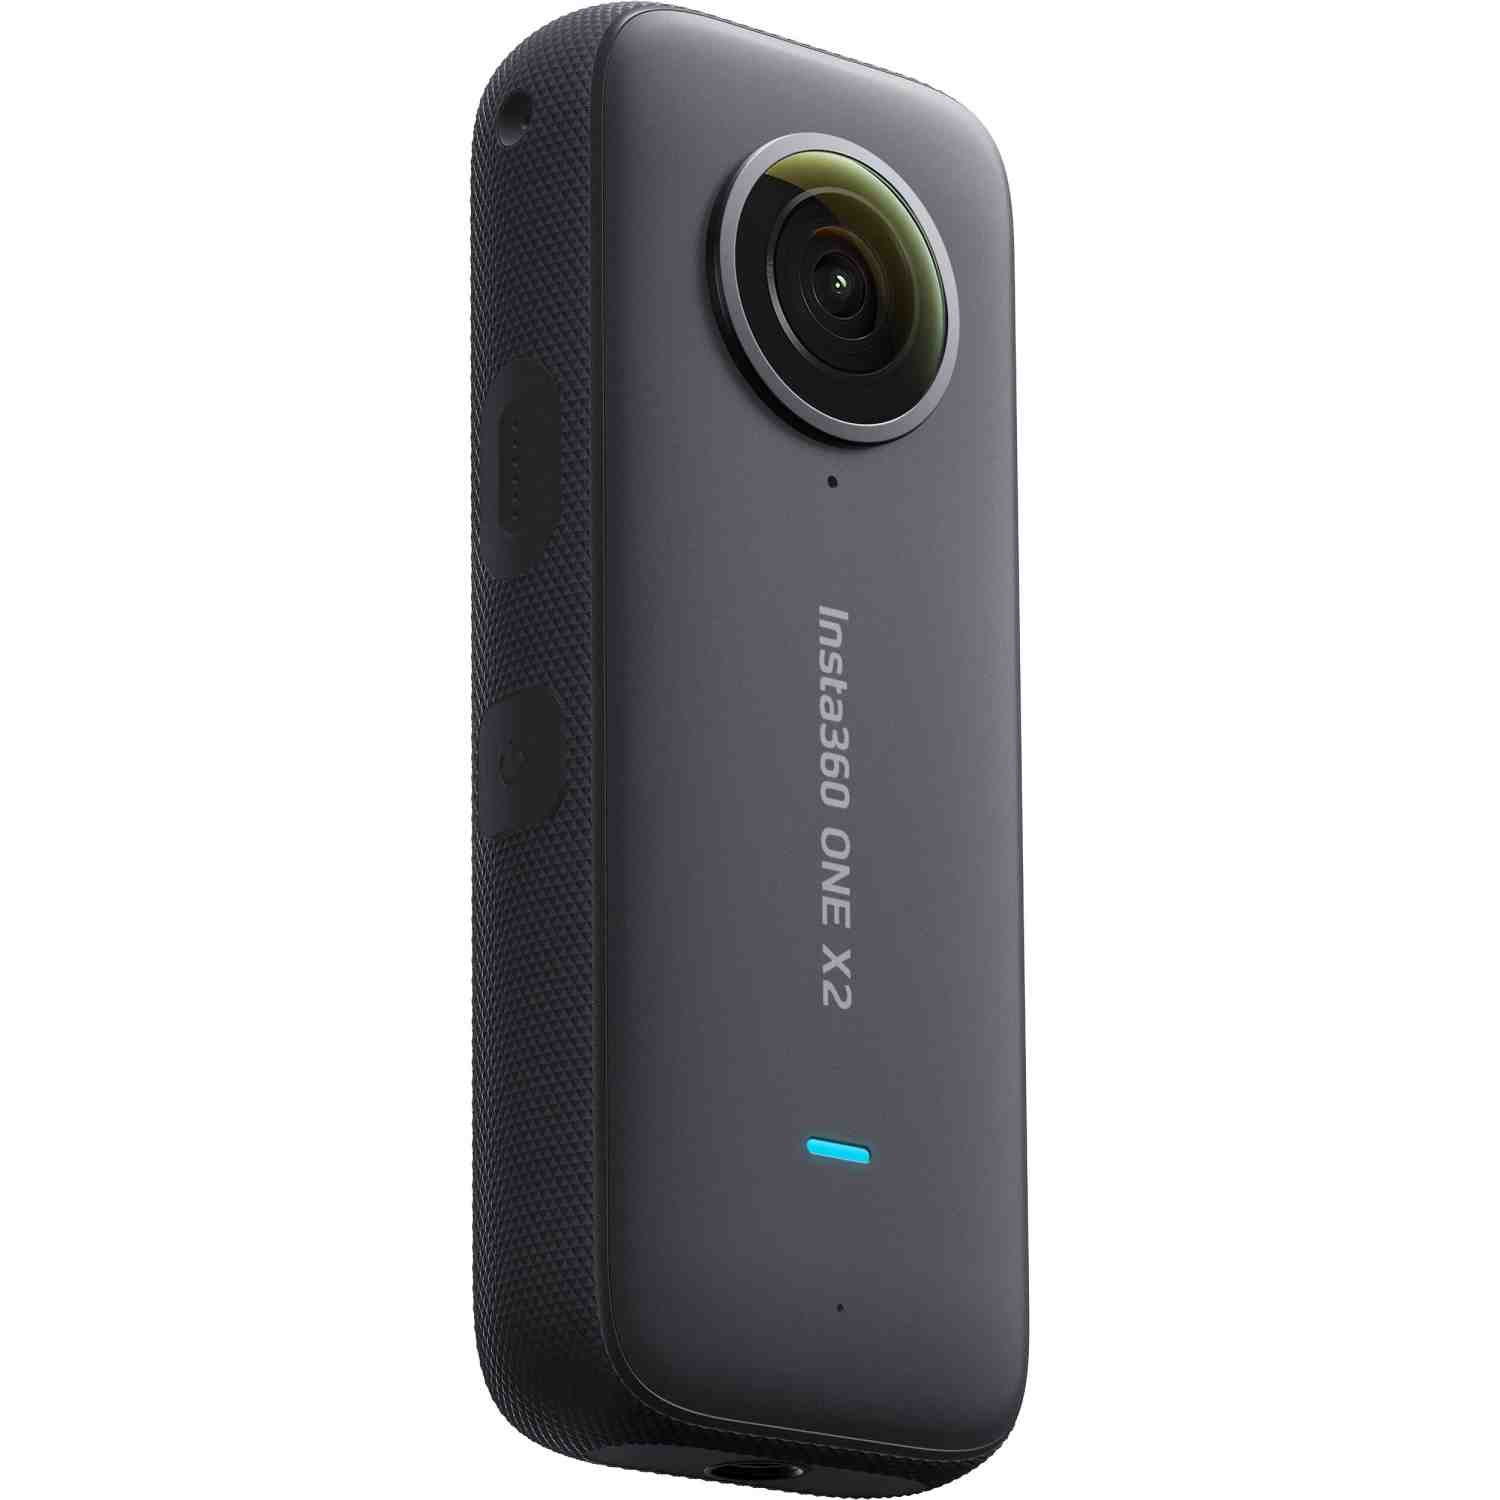 Is Insta360 a Chinese company?